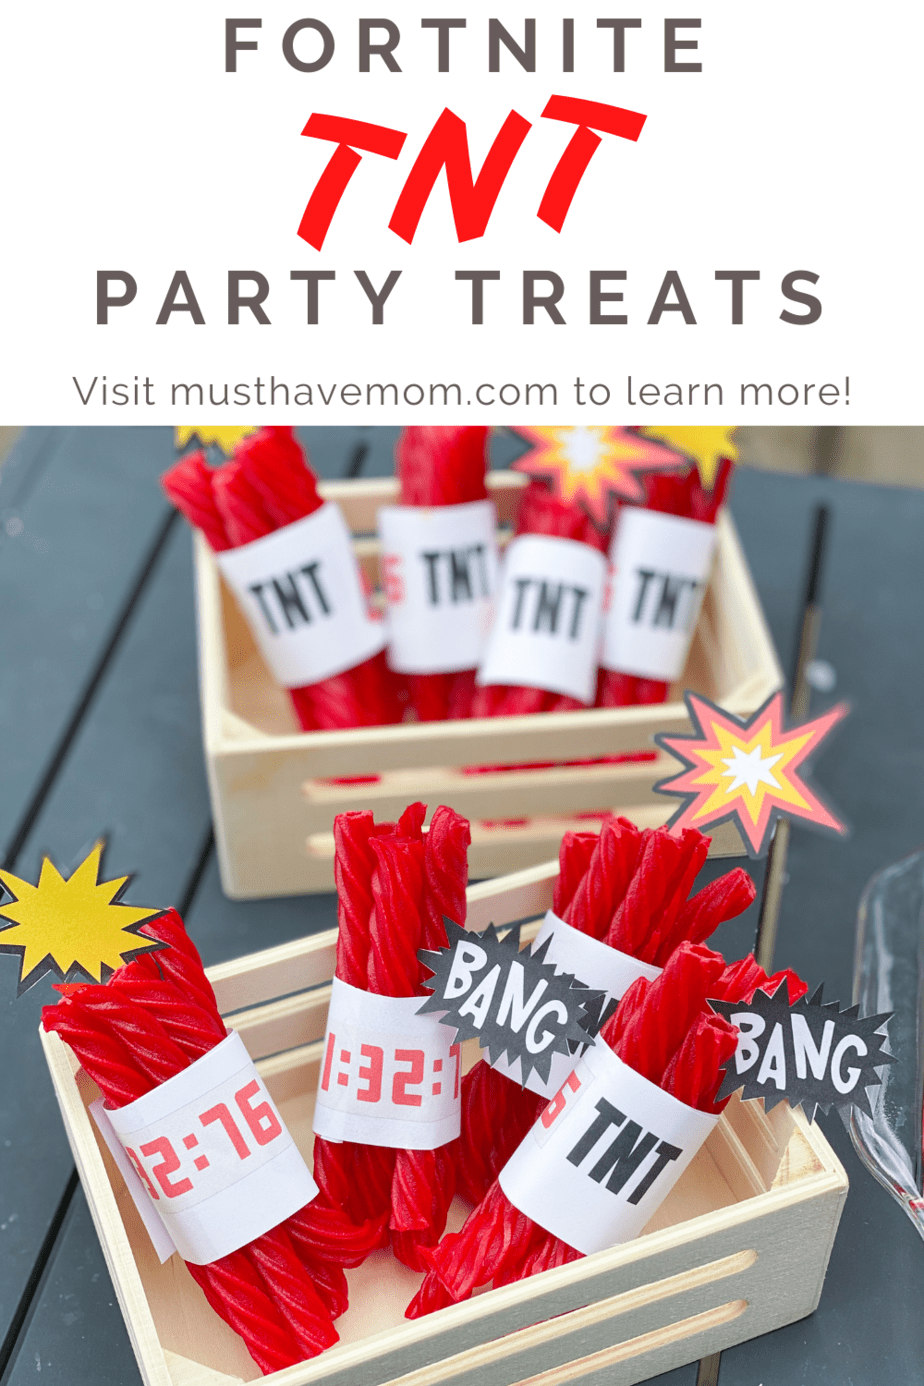 These Fortnite TNT Party Treats are the perfect snack for a Fornite party. Plus they double as great 4th of July decorations. #musthavemom #party #entertaining #birthdayparty #fortnite